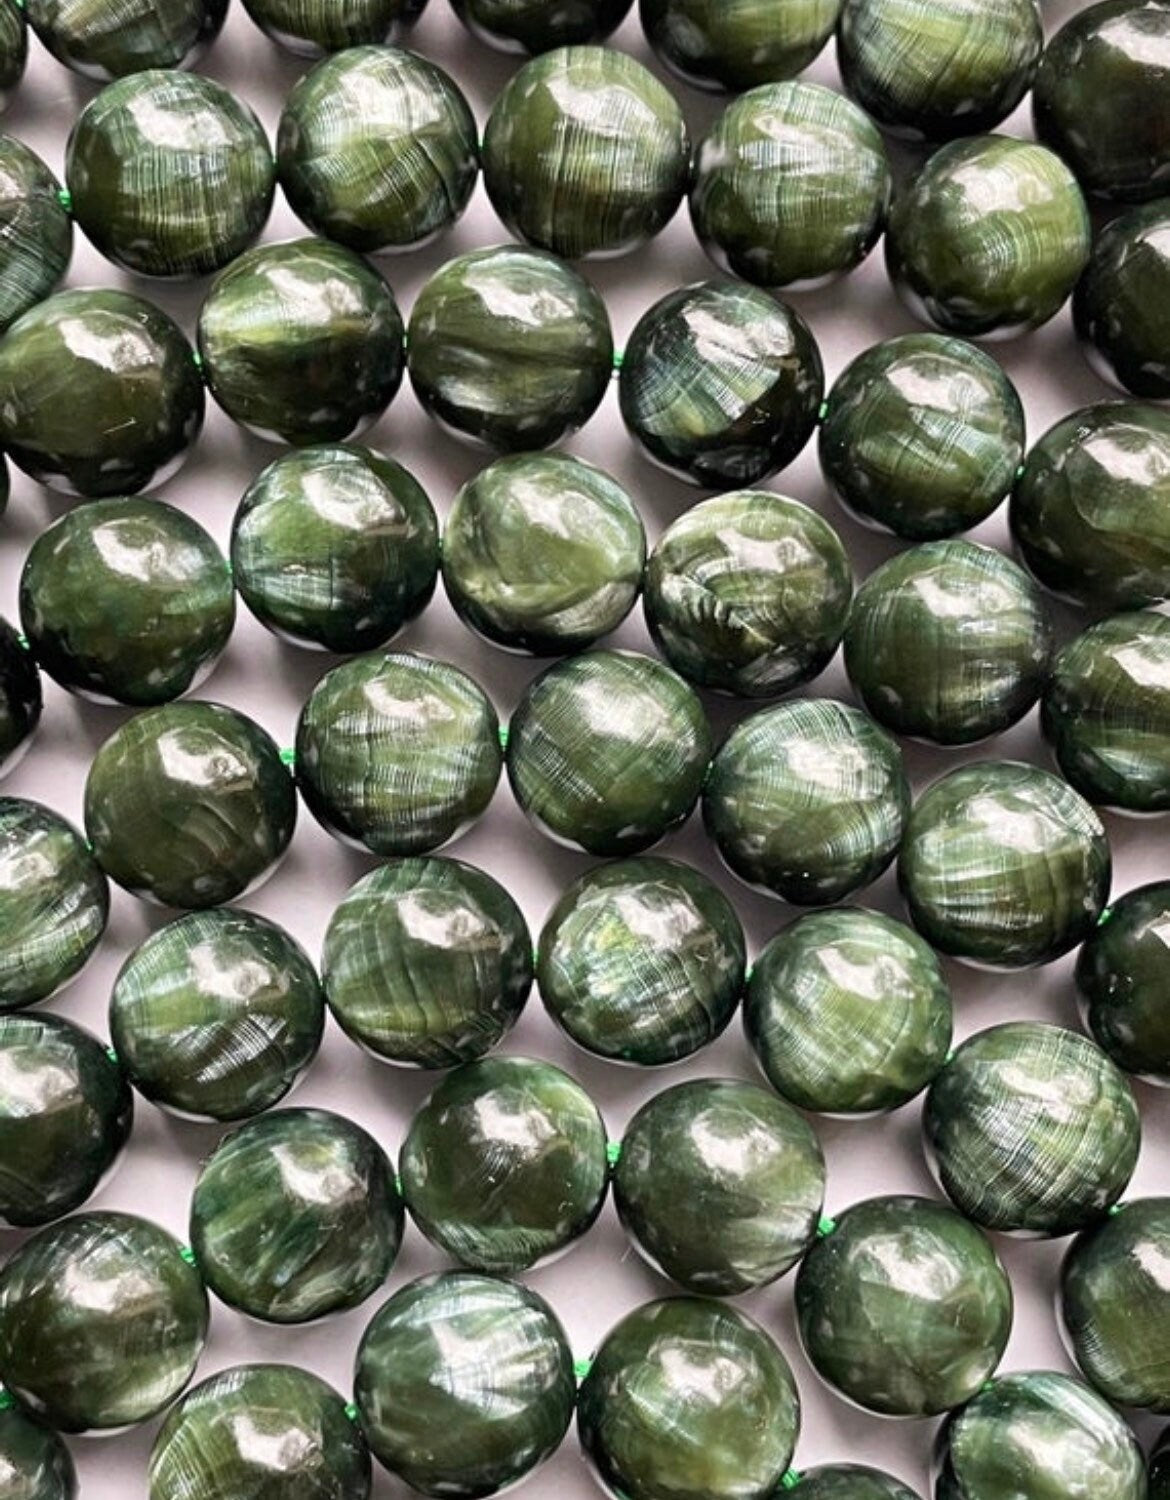 AAA Natural Seraphinite Gemstone Bead 6mm 8mm 10mm 12mm 13mm Round Bead, Gorgeous Natural Deep Green Color Seraphinite Beads, Excellent High Quality 15.5"